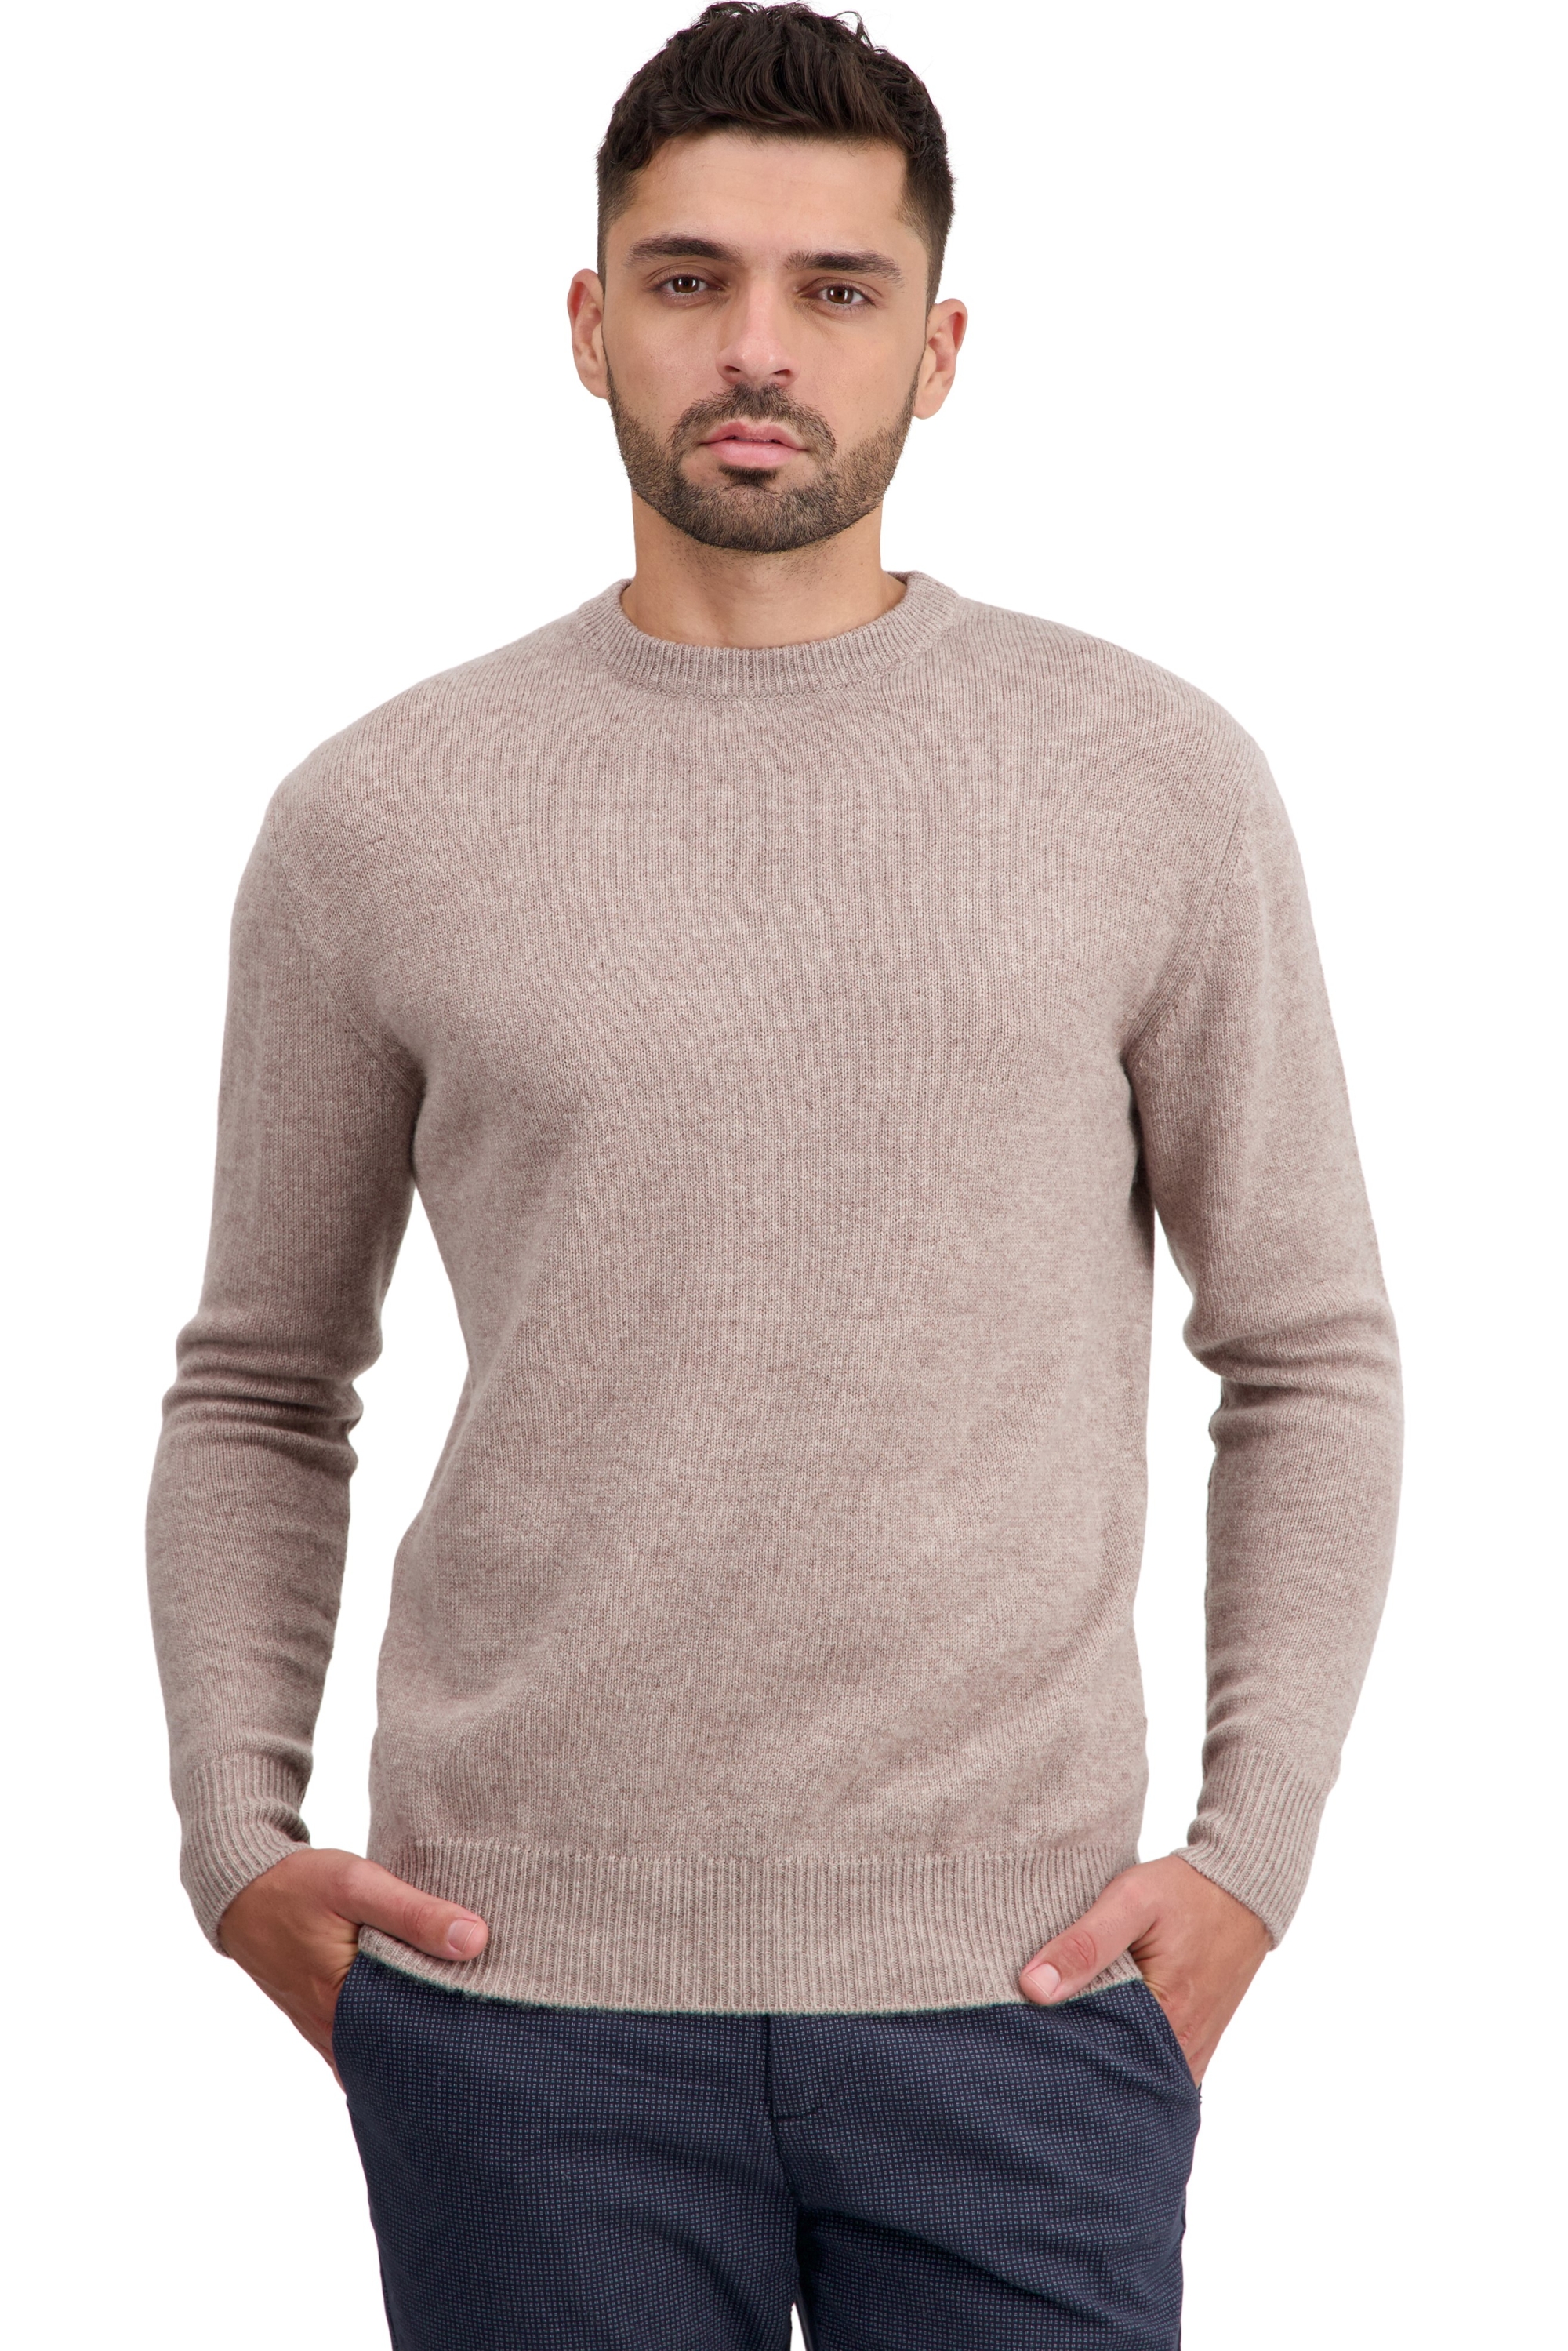 Cashmere men basic sweaters at low prices touraine first toast l